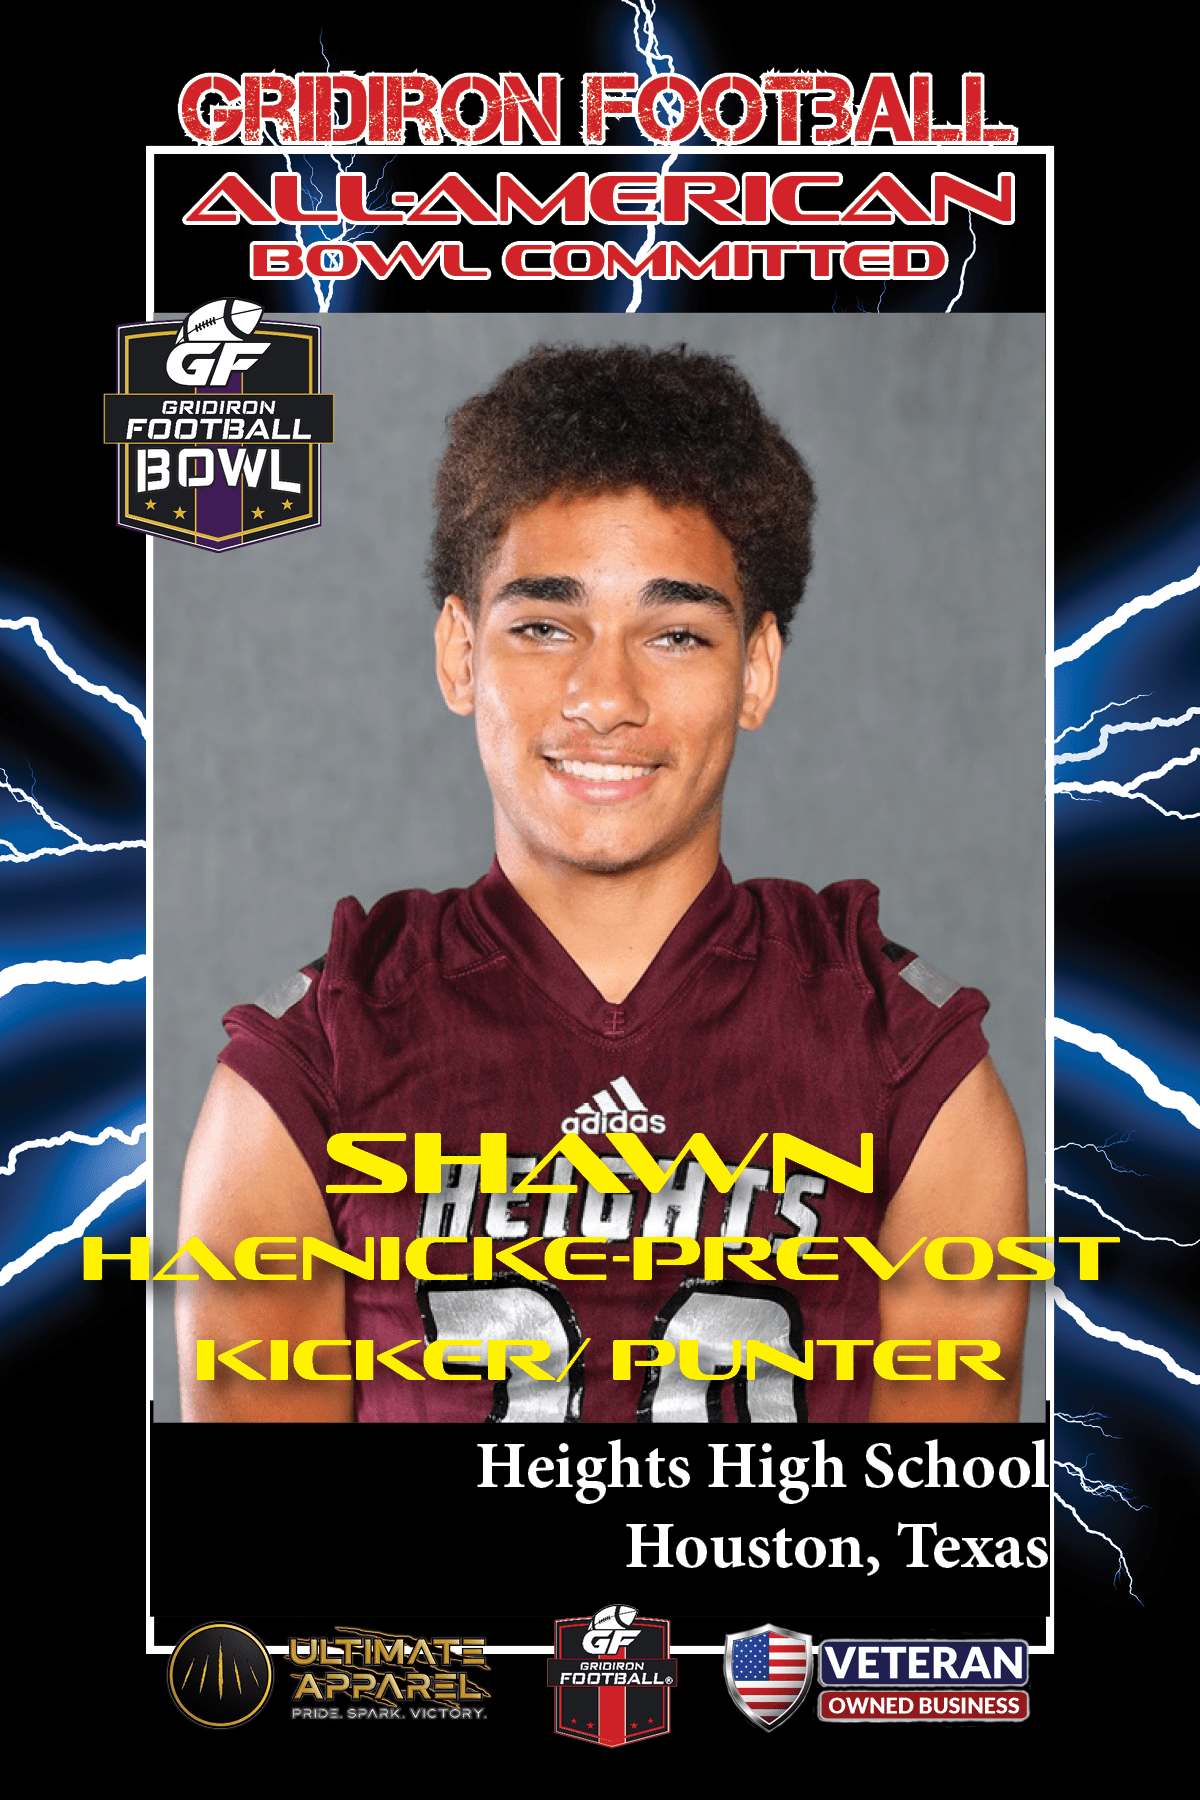 BREAKING NEWS: Heights High School (Houston, TX) K/P Shawn Haenicke-Prevost Commits To The Gridiron Football All-American Bowl Game